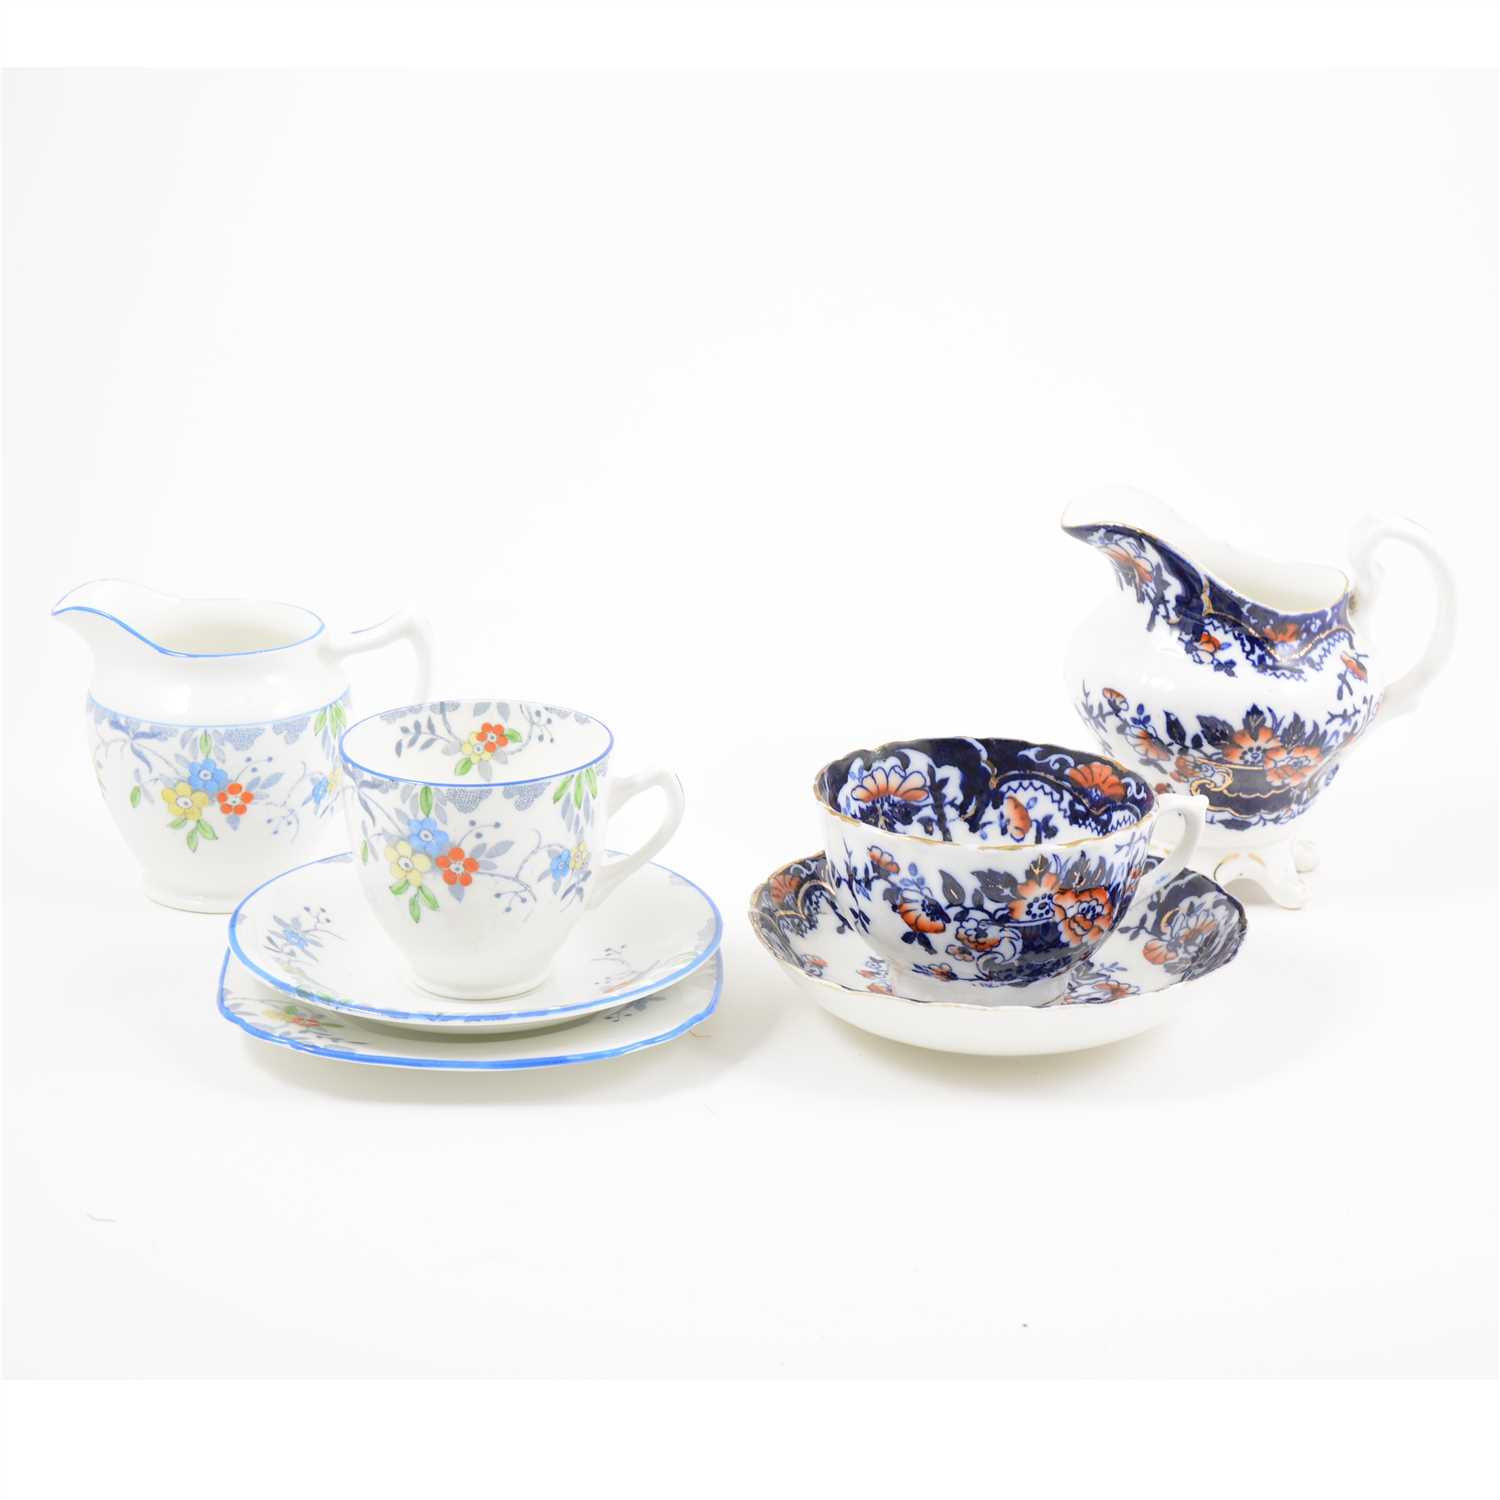 Lot 53 - Two part tea sets, including an Ironstone style teaset, and a 1930s part set